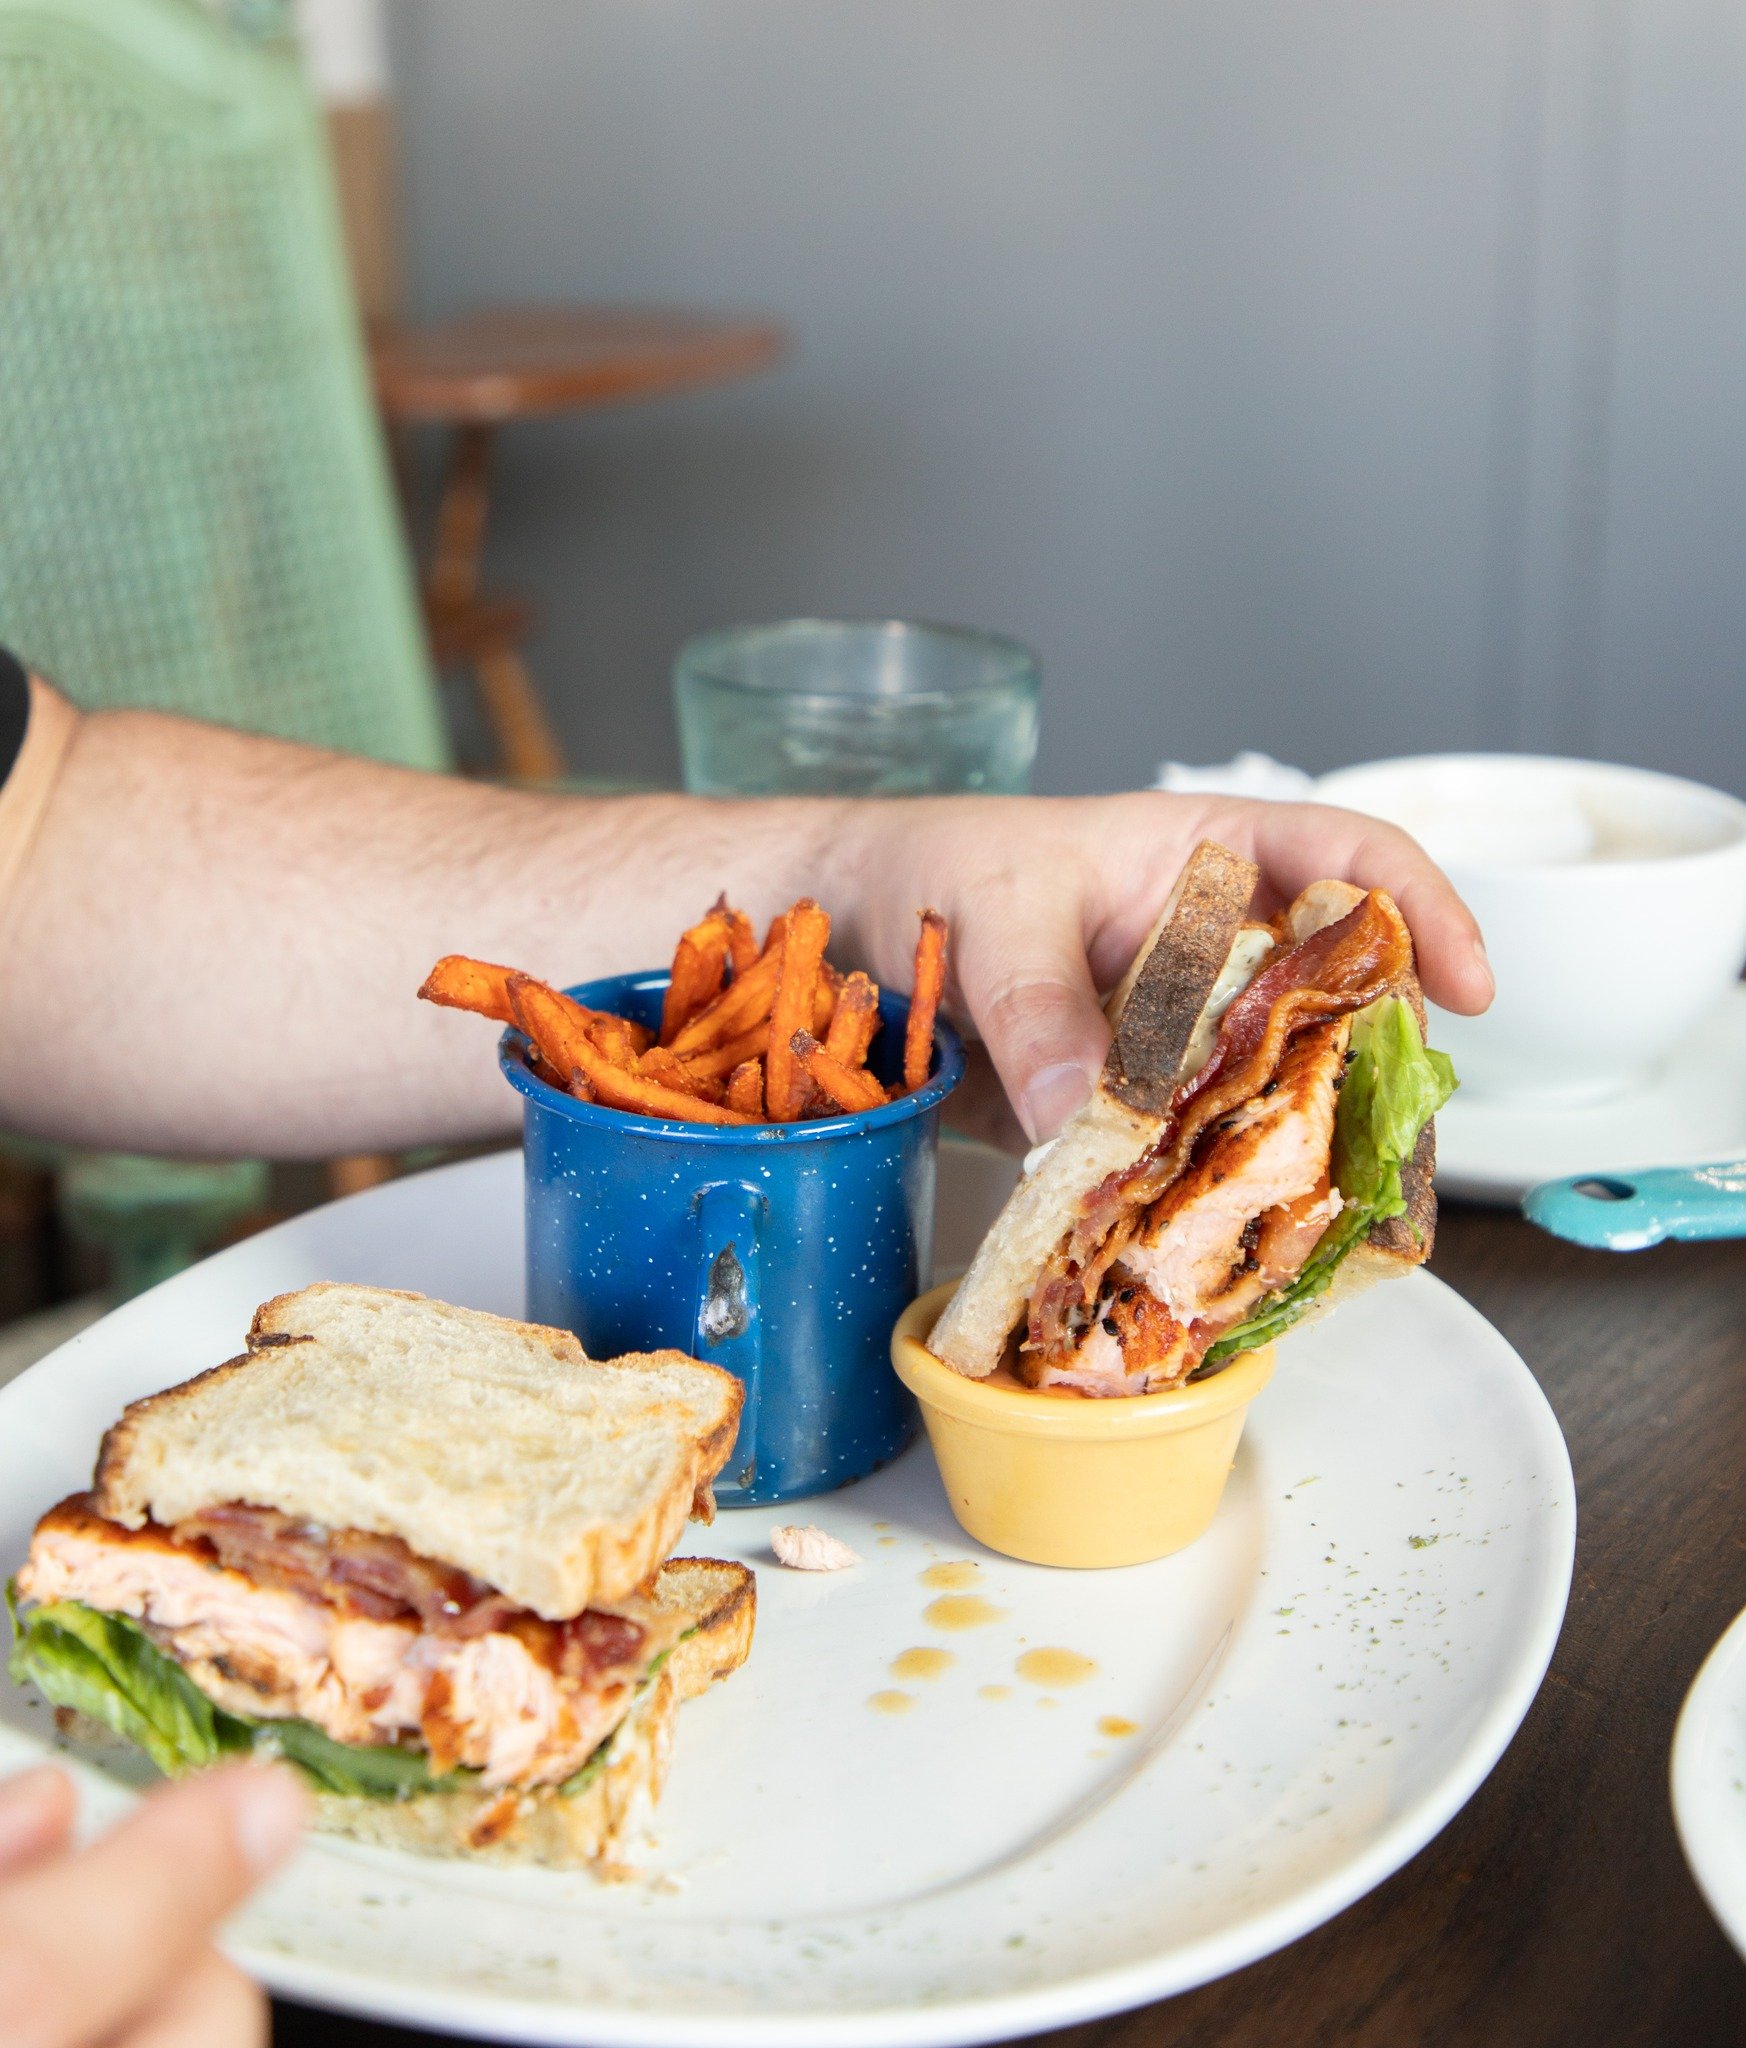 Take your midday meal up a notch 😎 #lunch
...

#dinegps #visitpalmdesert #visitgreaterpalmsprings #cupscafe #foodcontent #sandwhich #palmdesertlunch